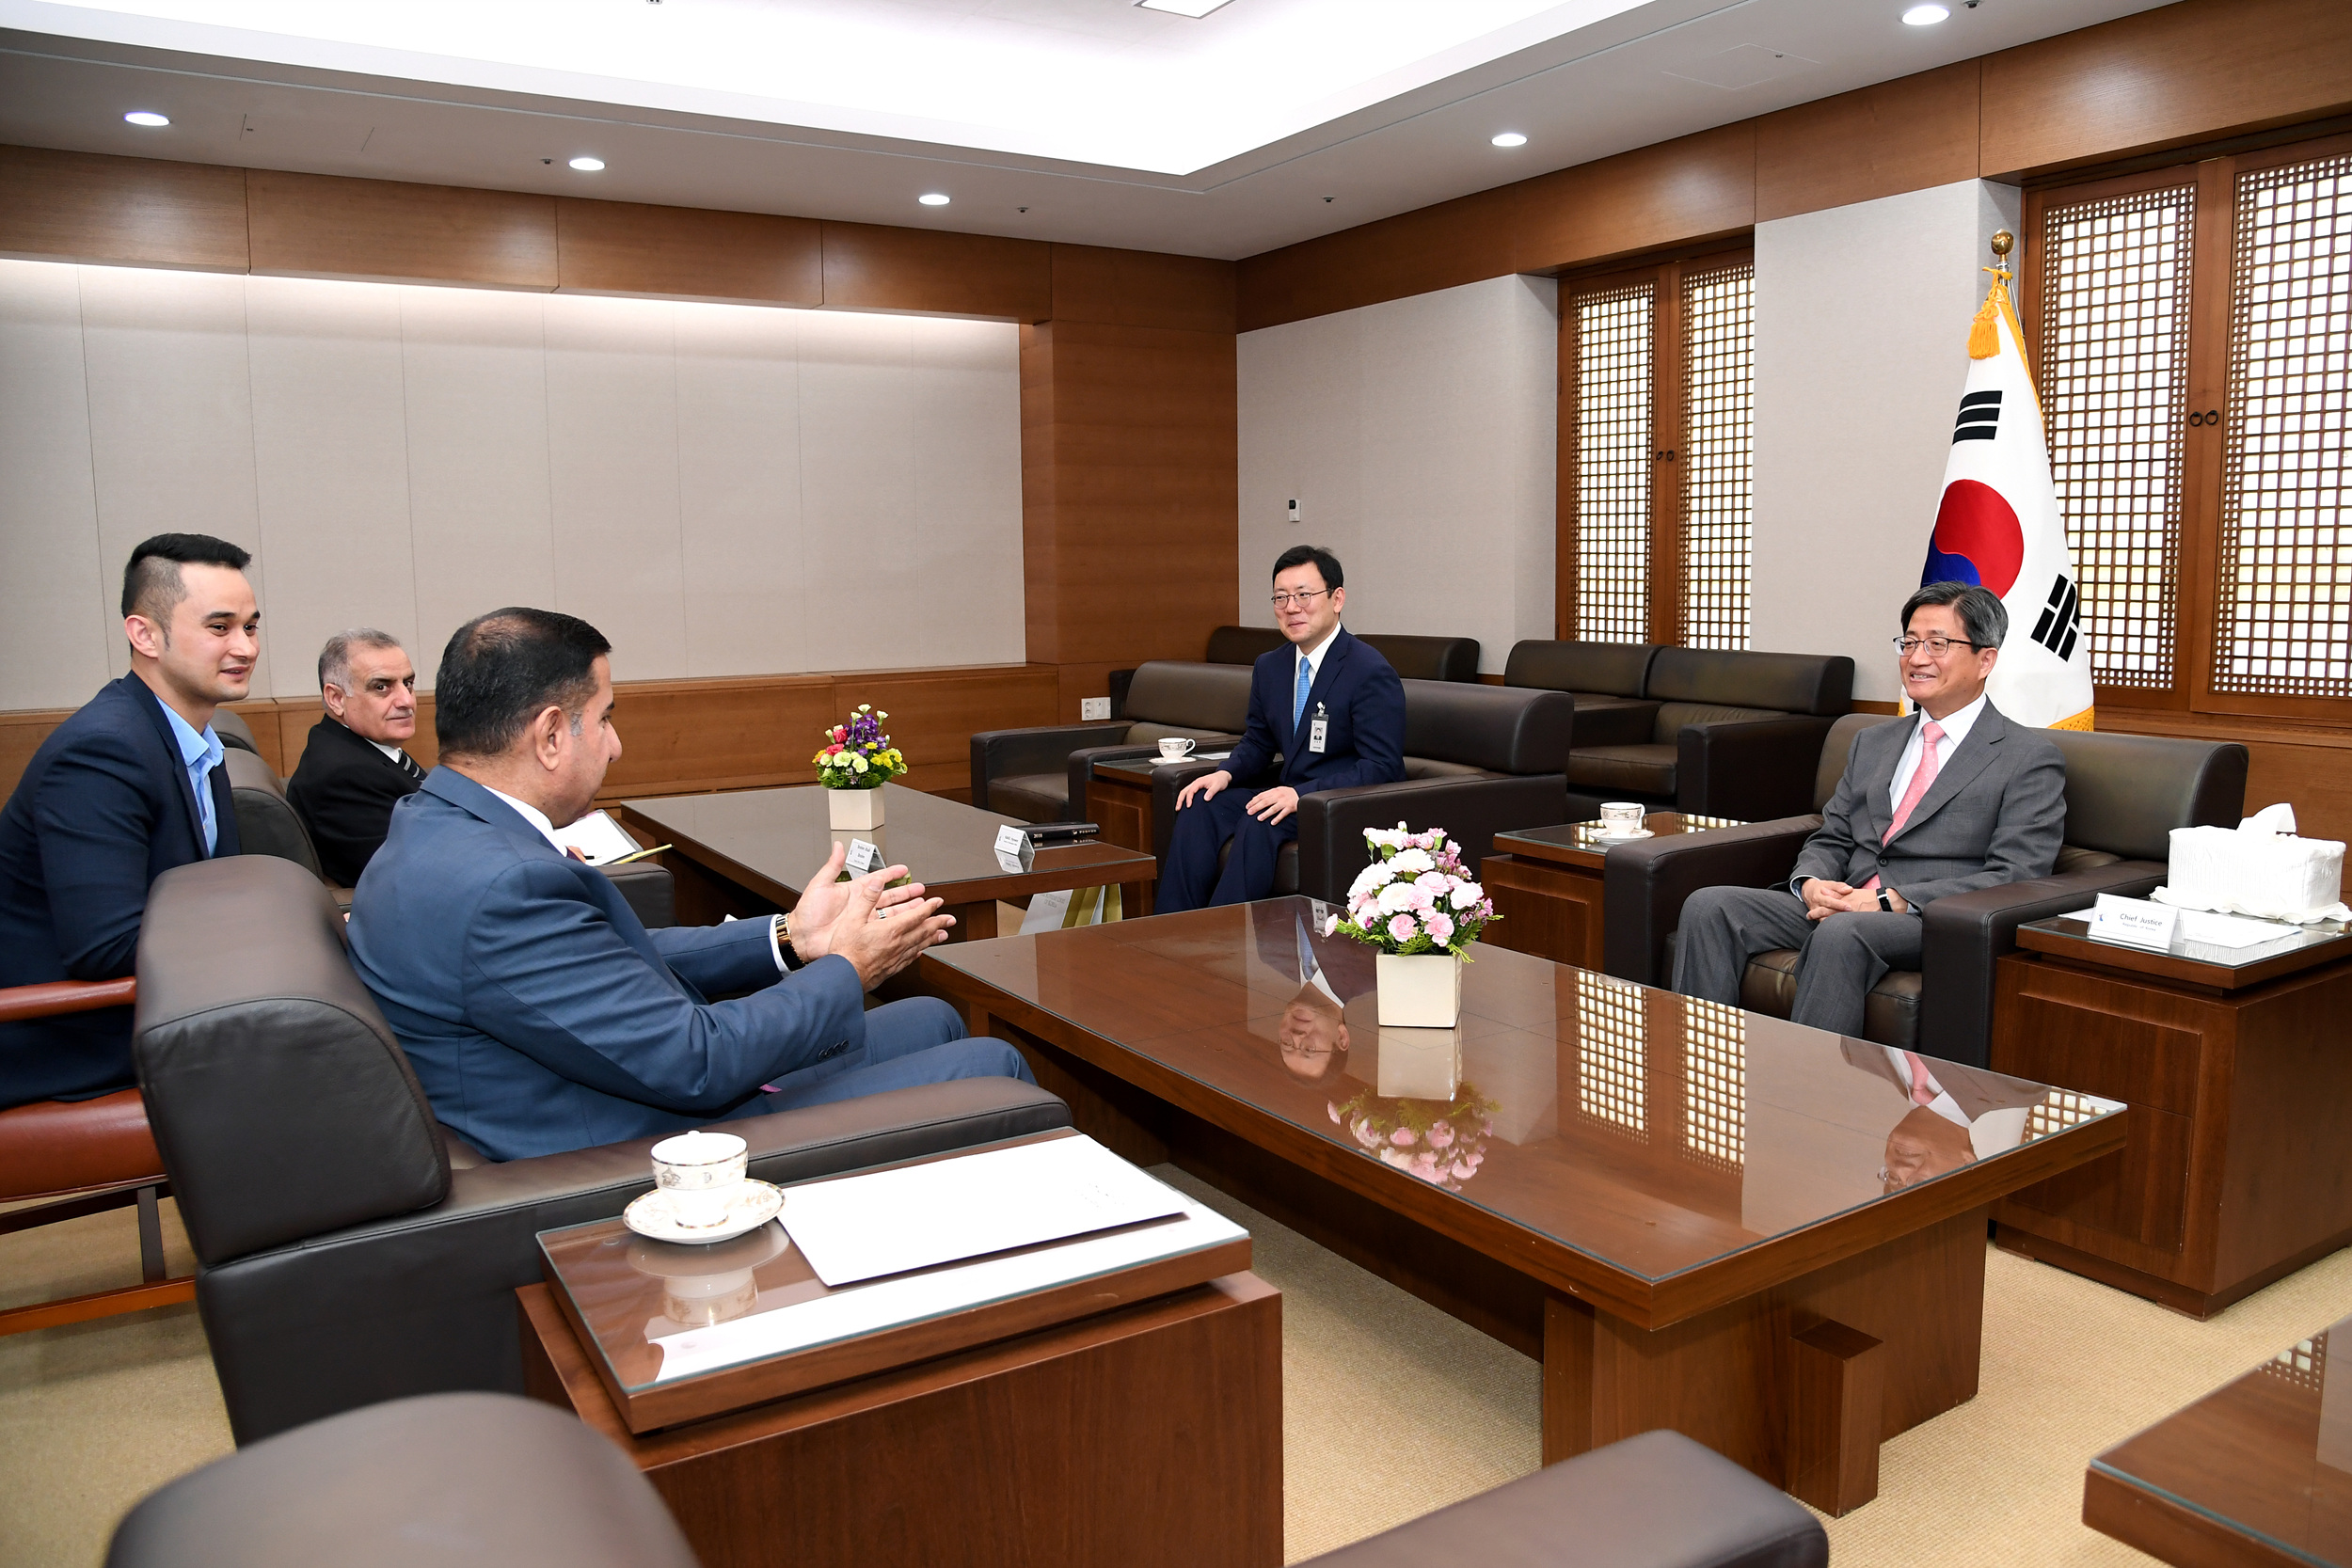 [6_12_18]Ambassador of the Republic of Iraq to Korea pays a courtesy call on the Chief Justice